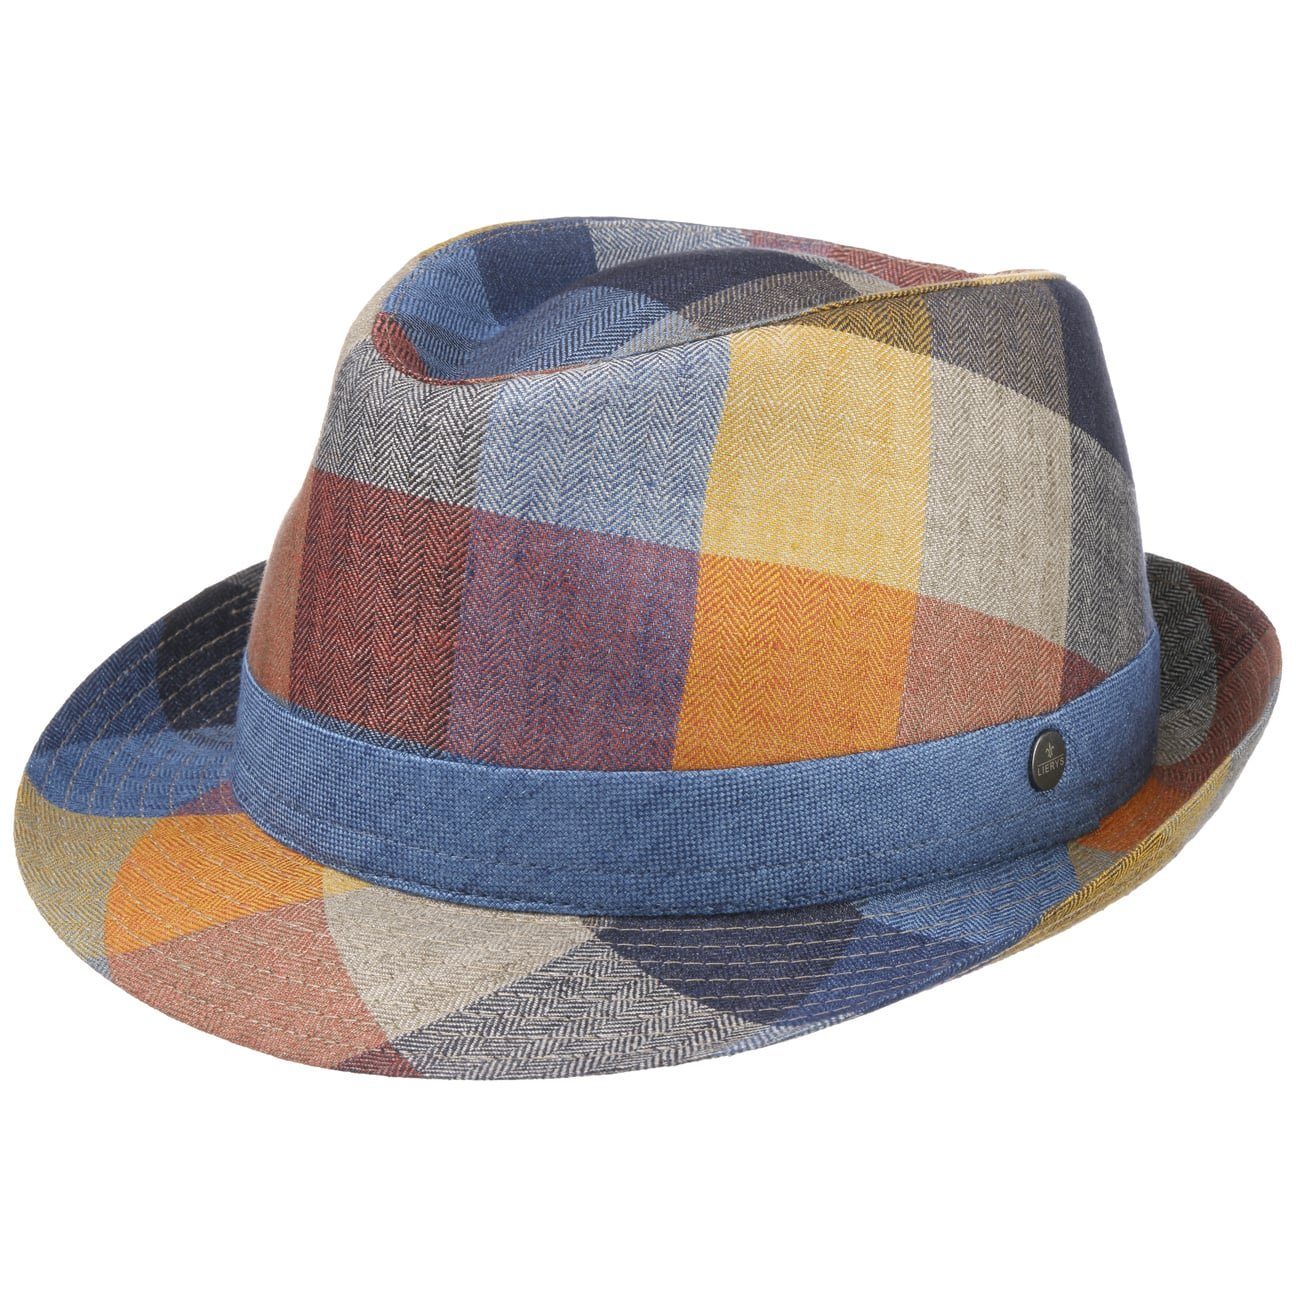 Lierys Trilby (1-St) Trilby mit Futter, Made in Italy bunt | Trilbies